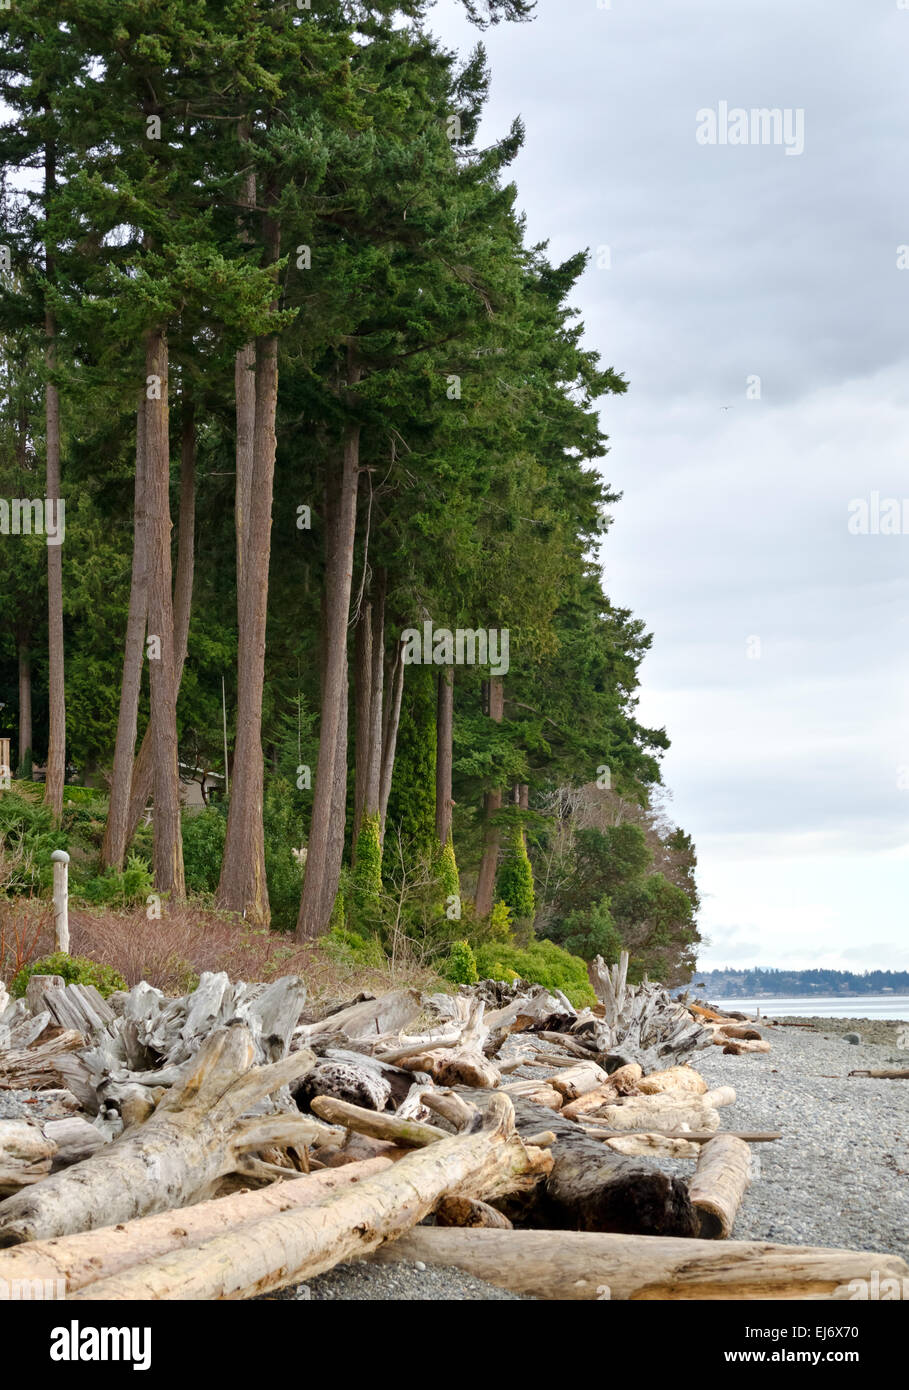 Rugged coastline and beach with driftwood and tall fir trees near Sechelt on the Sunshine Coast in British Columbia, Canada. Stock Photo